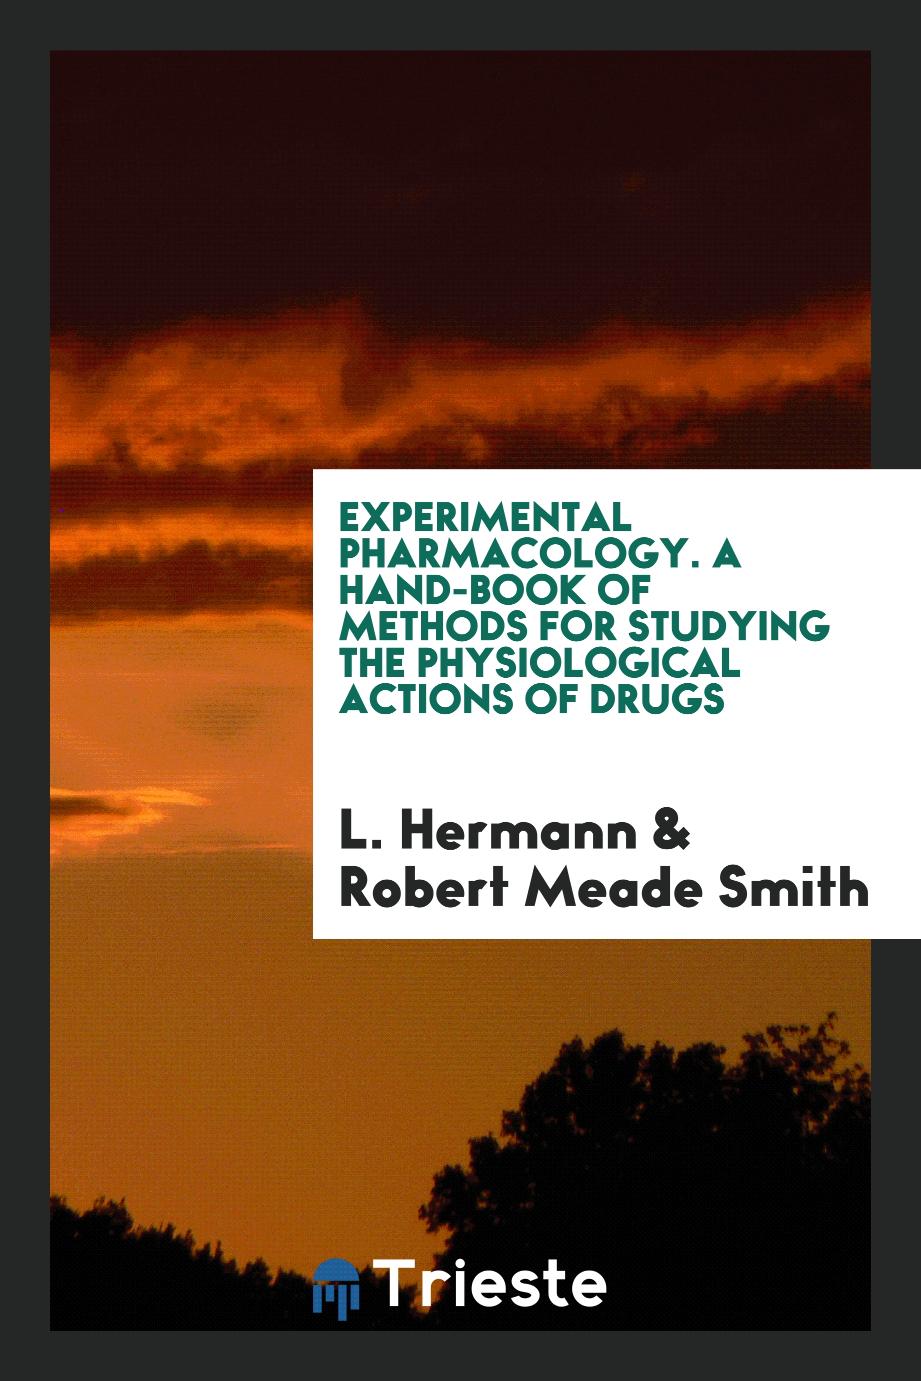 Experimental pharmacology. A hand-book of methods for studying the physiological actions of drugs